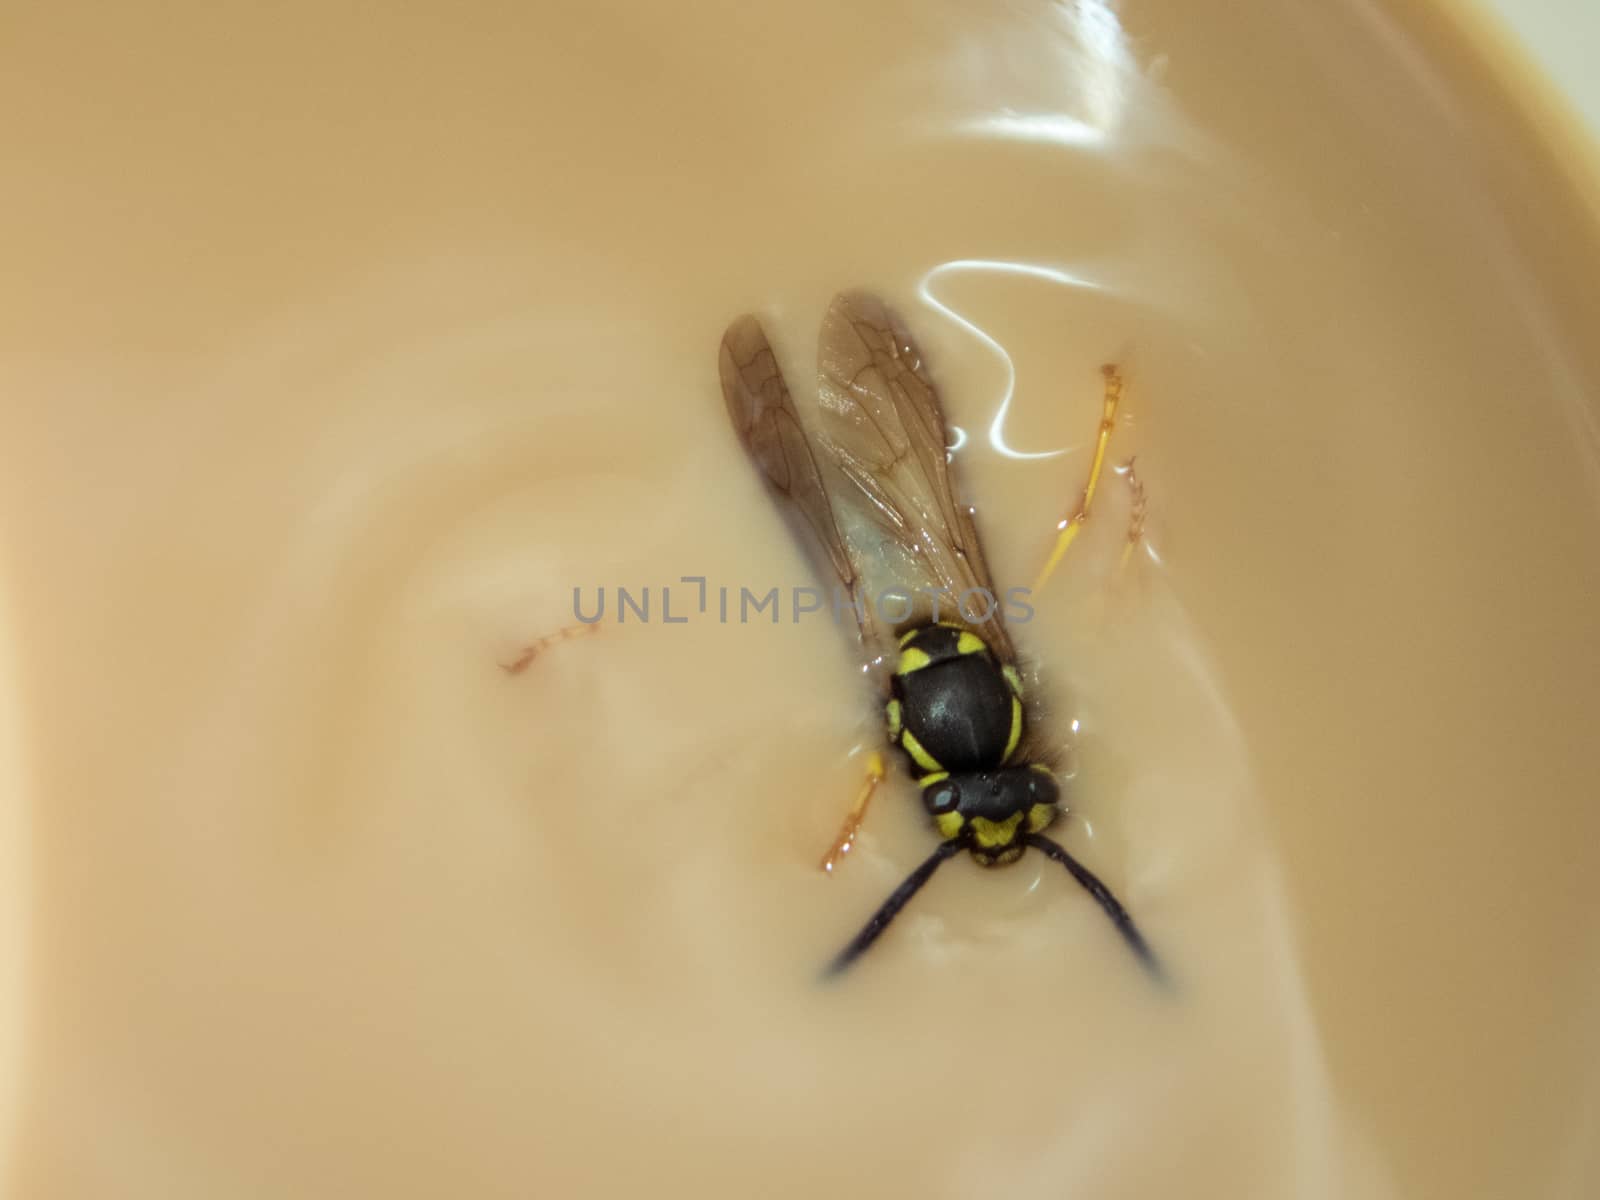 Wasp in the coffe by thomas_males